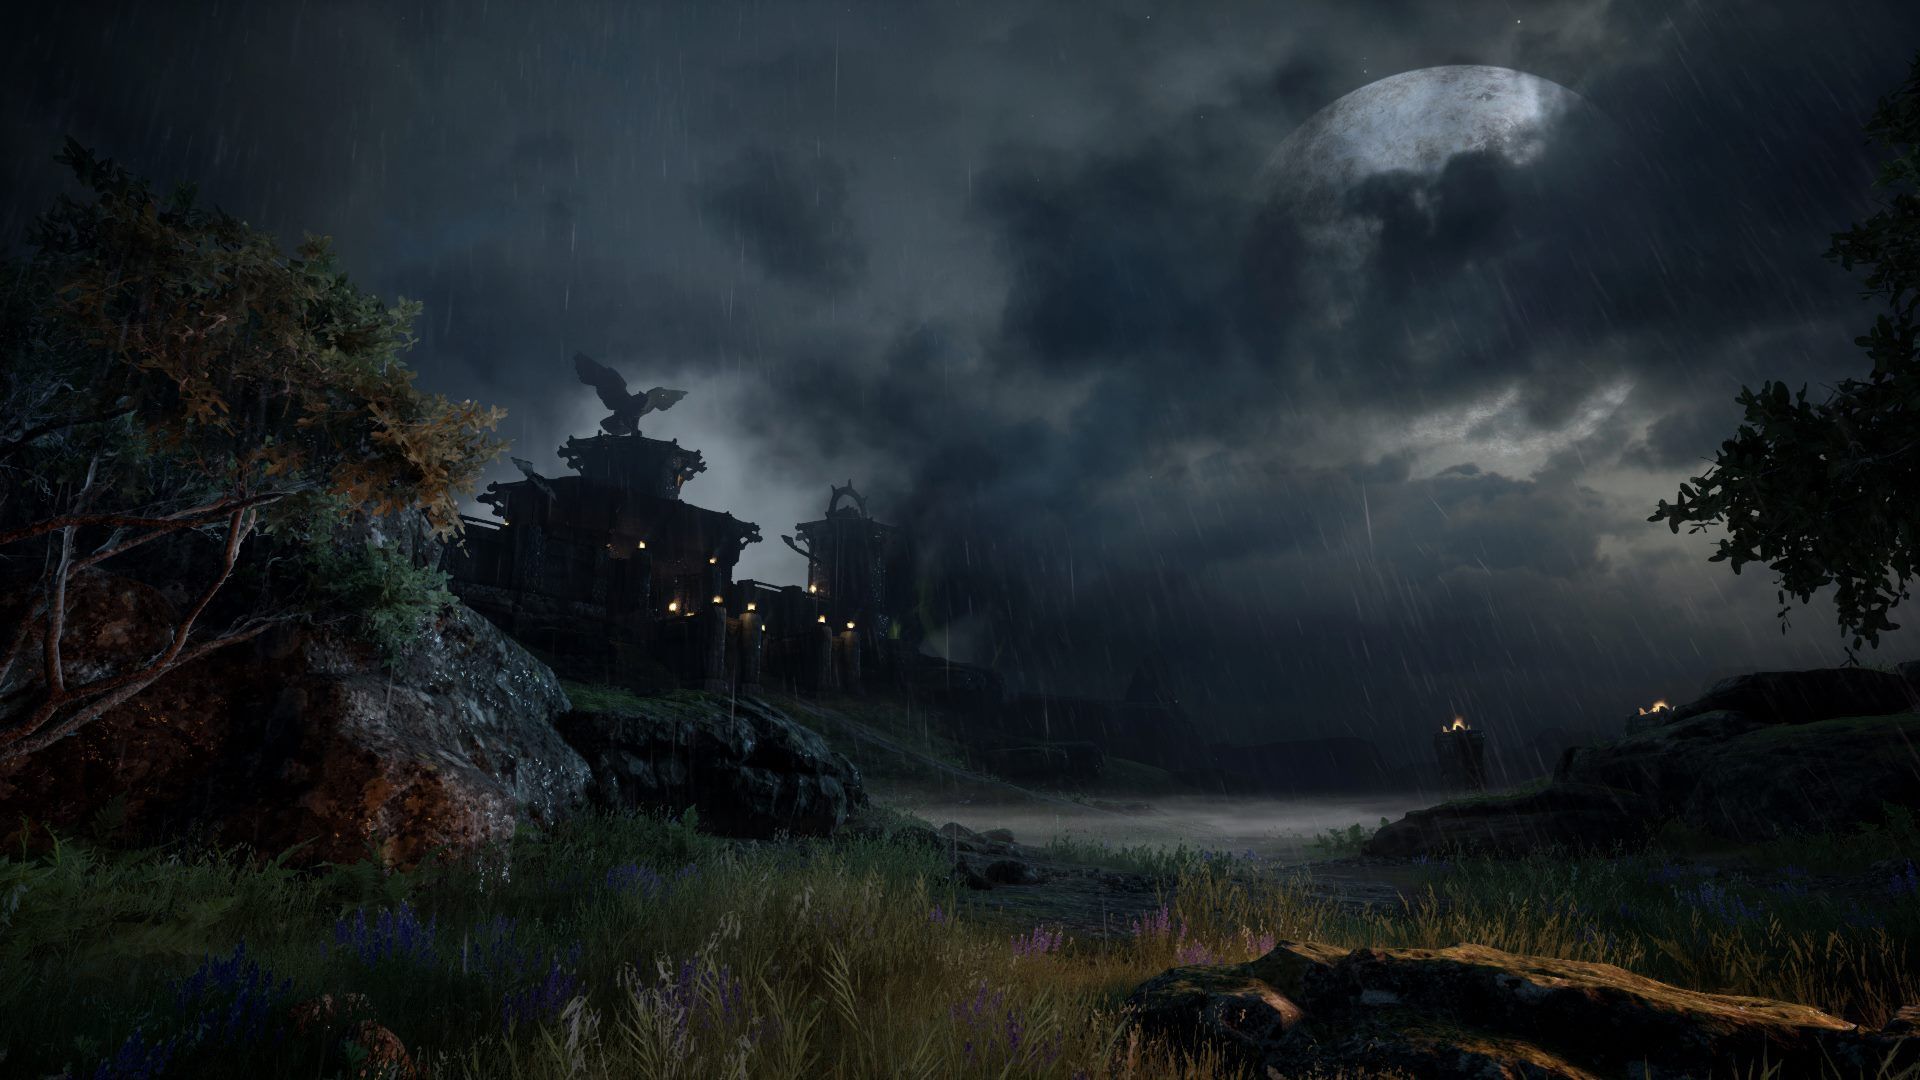 Dragon Age Inquisition: castle at night wallpaper and image, picture, photo